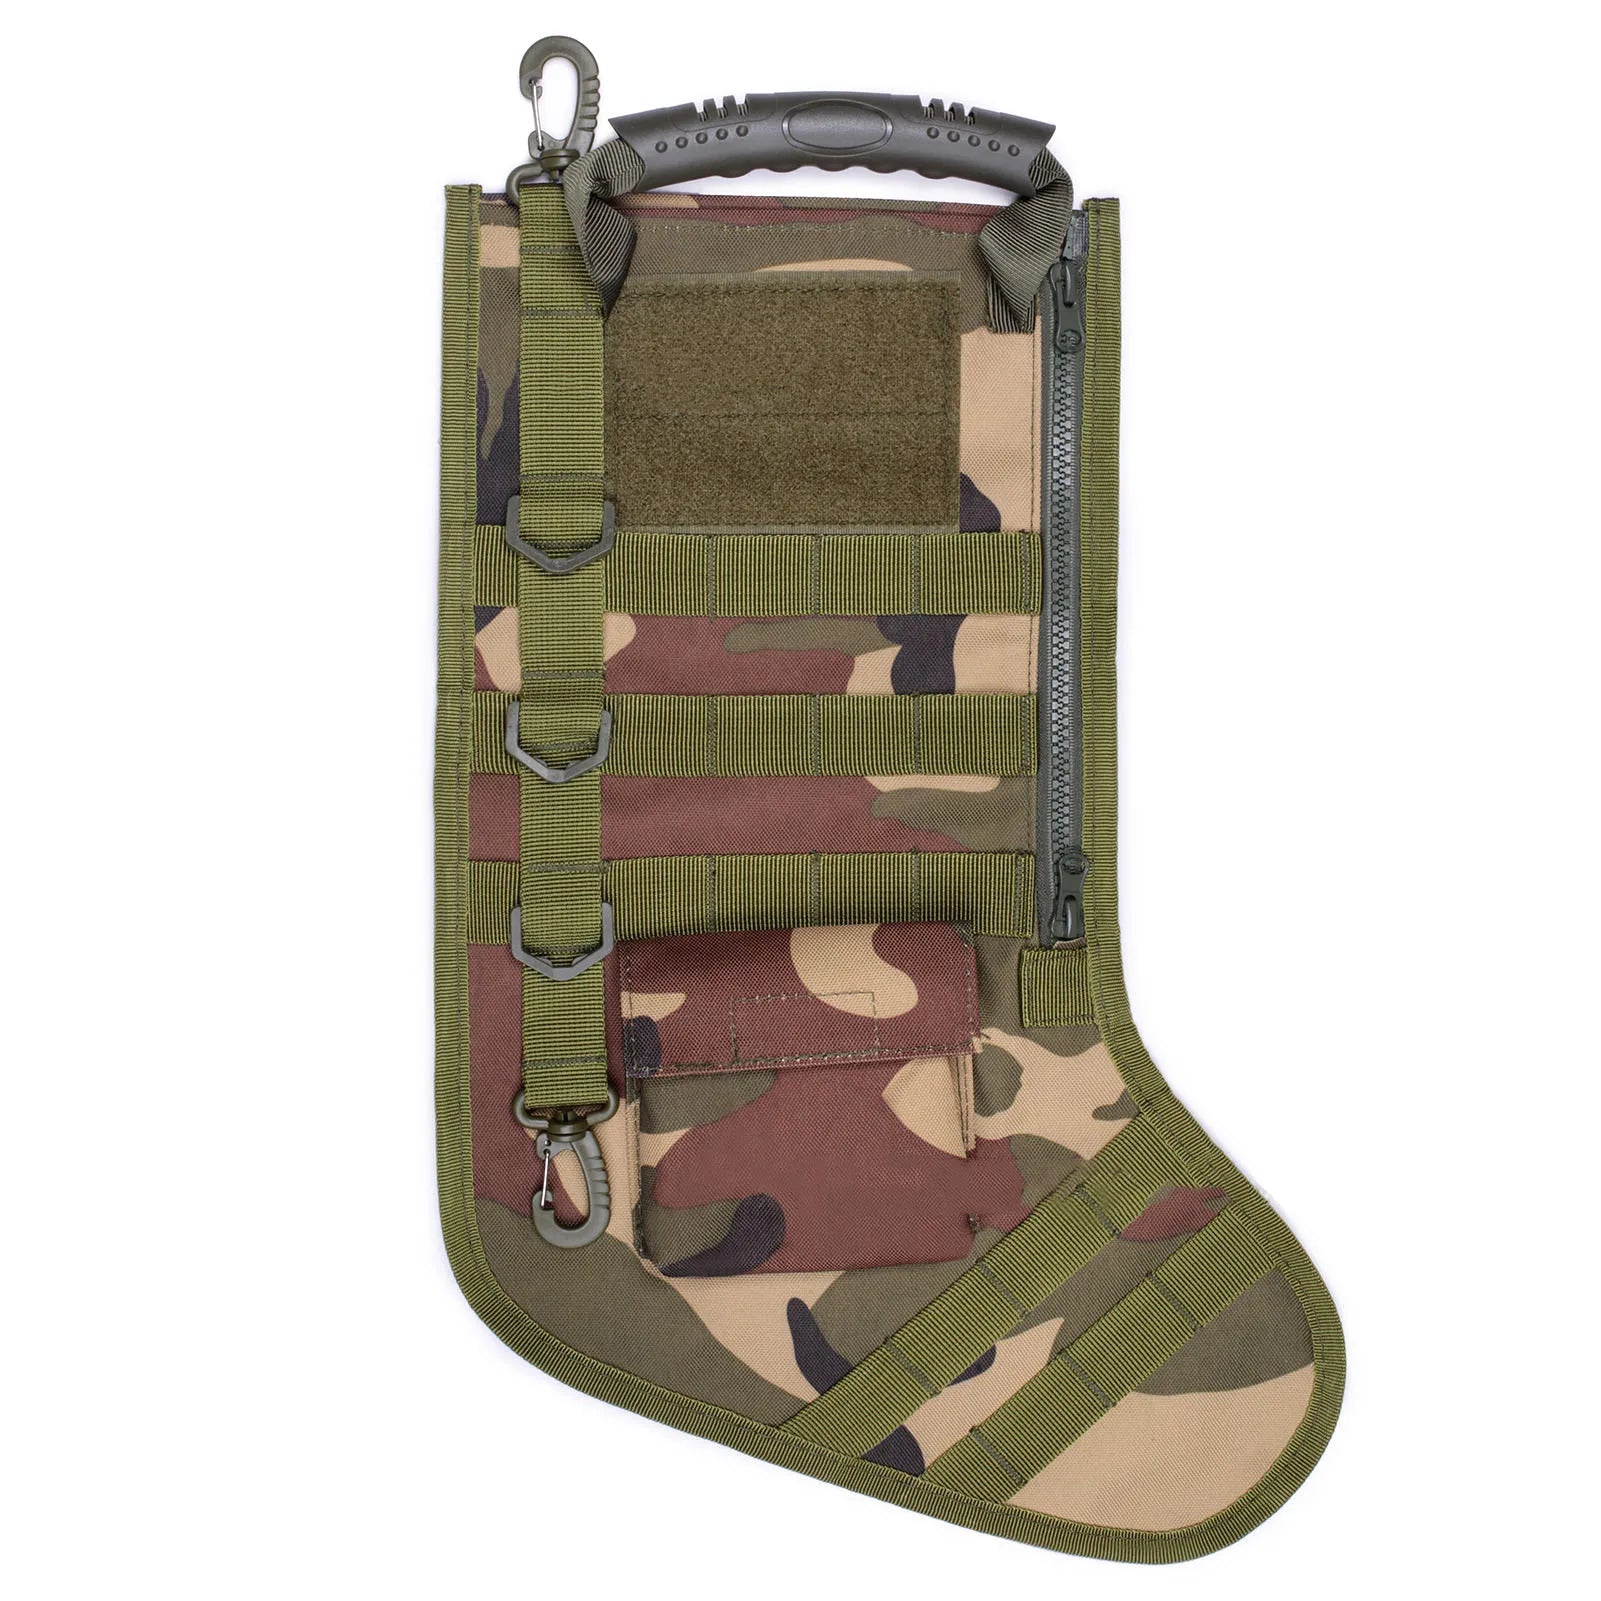 Tactical Christmas Gift Socks Outdoor Sports Pendant Military Fan Bag Accessories Storage Bag Military Style Christmas Stocking